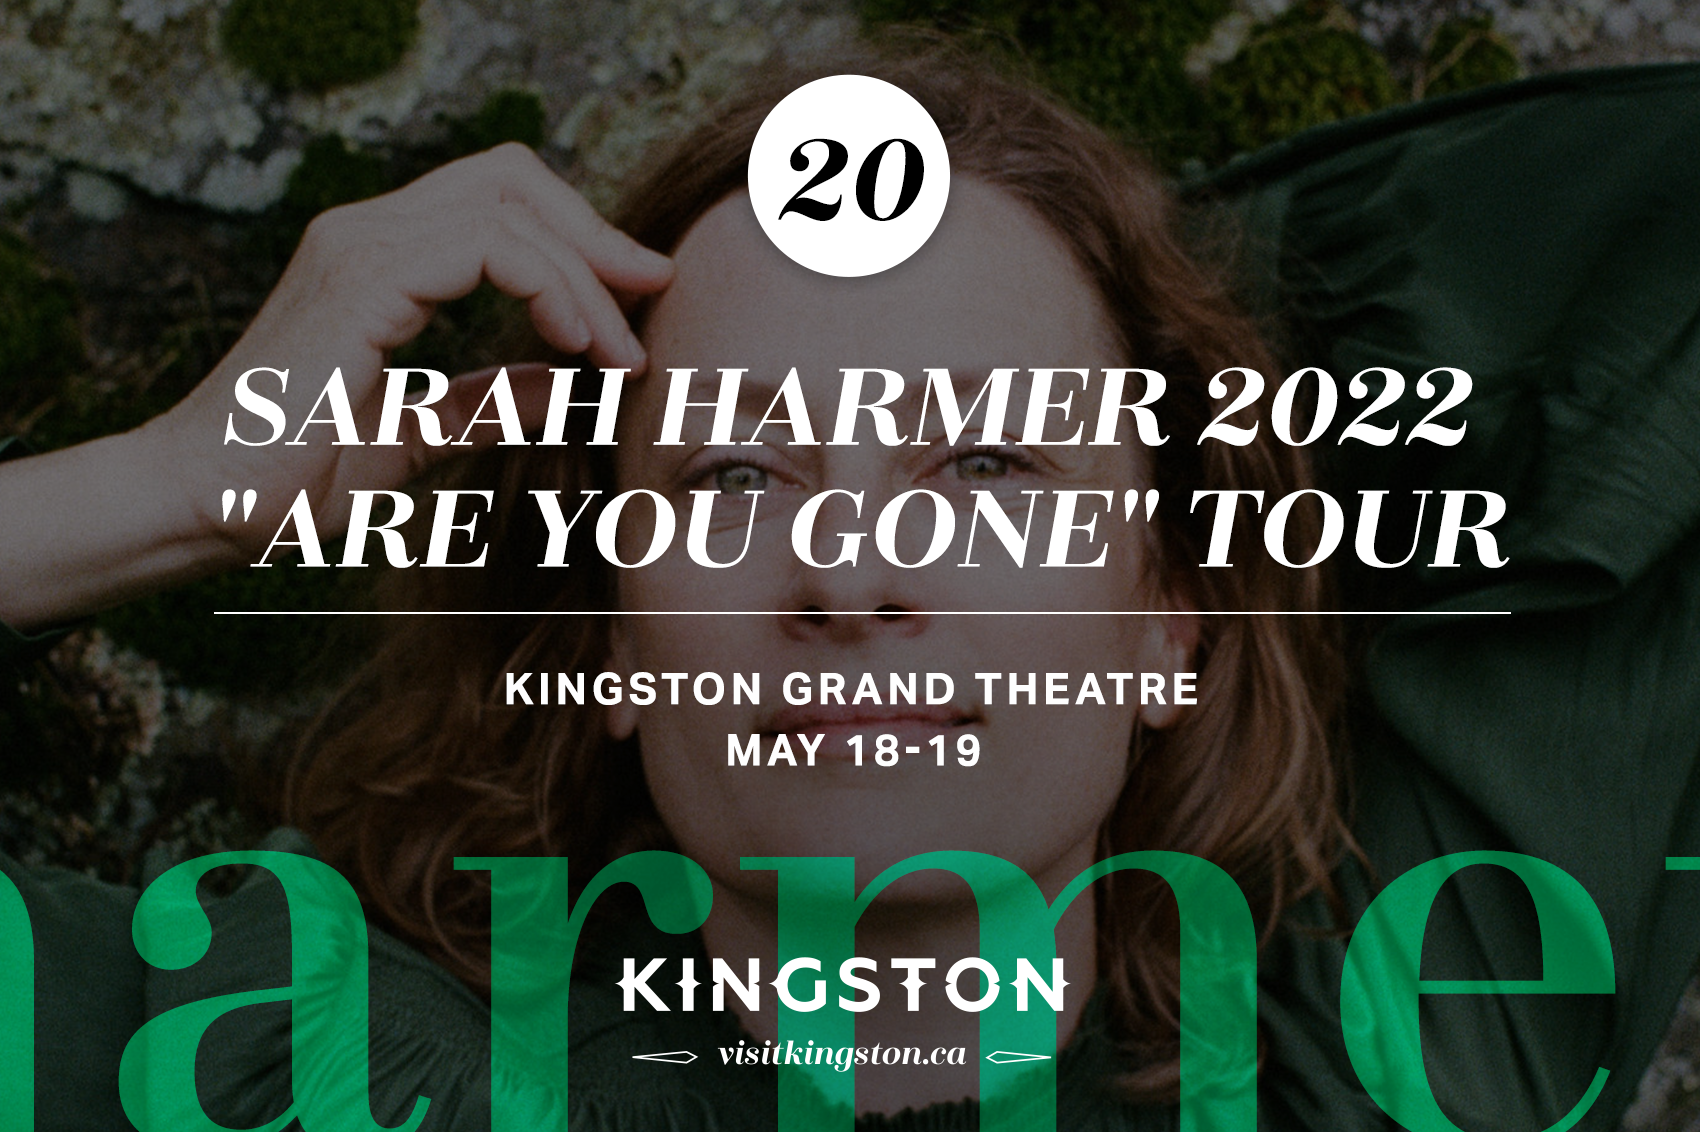 Sarah Harmer 2022 "Are You Gone" Tour